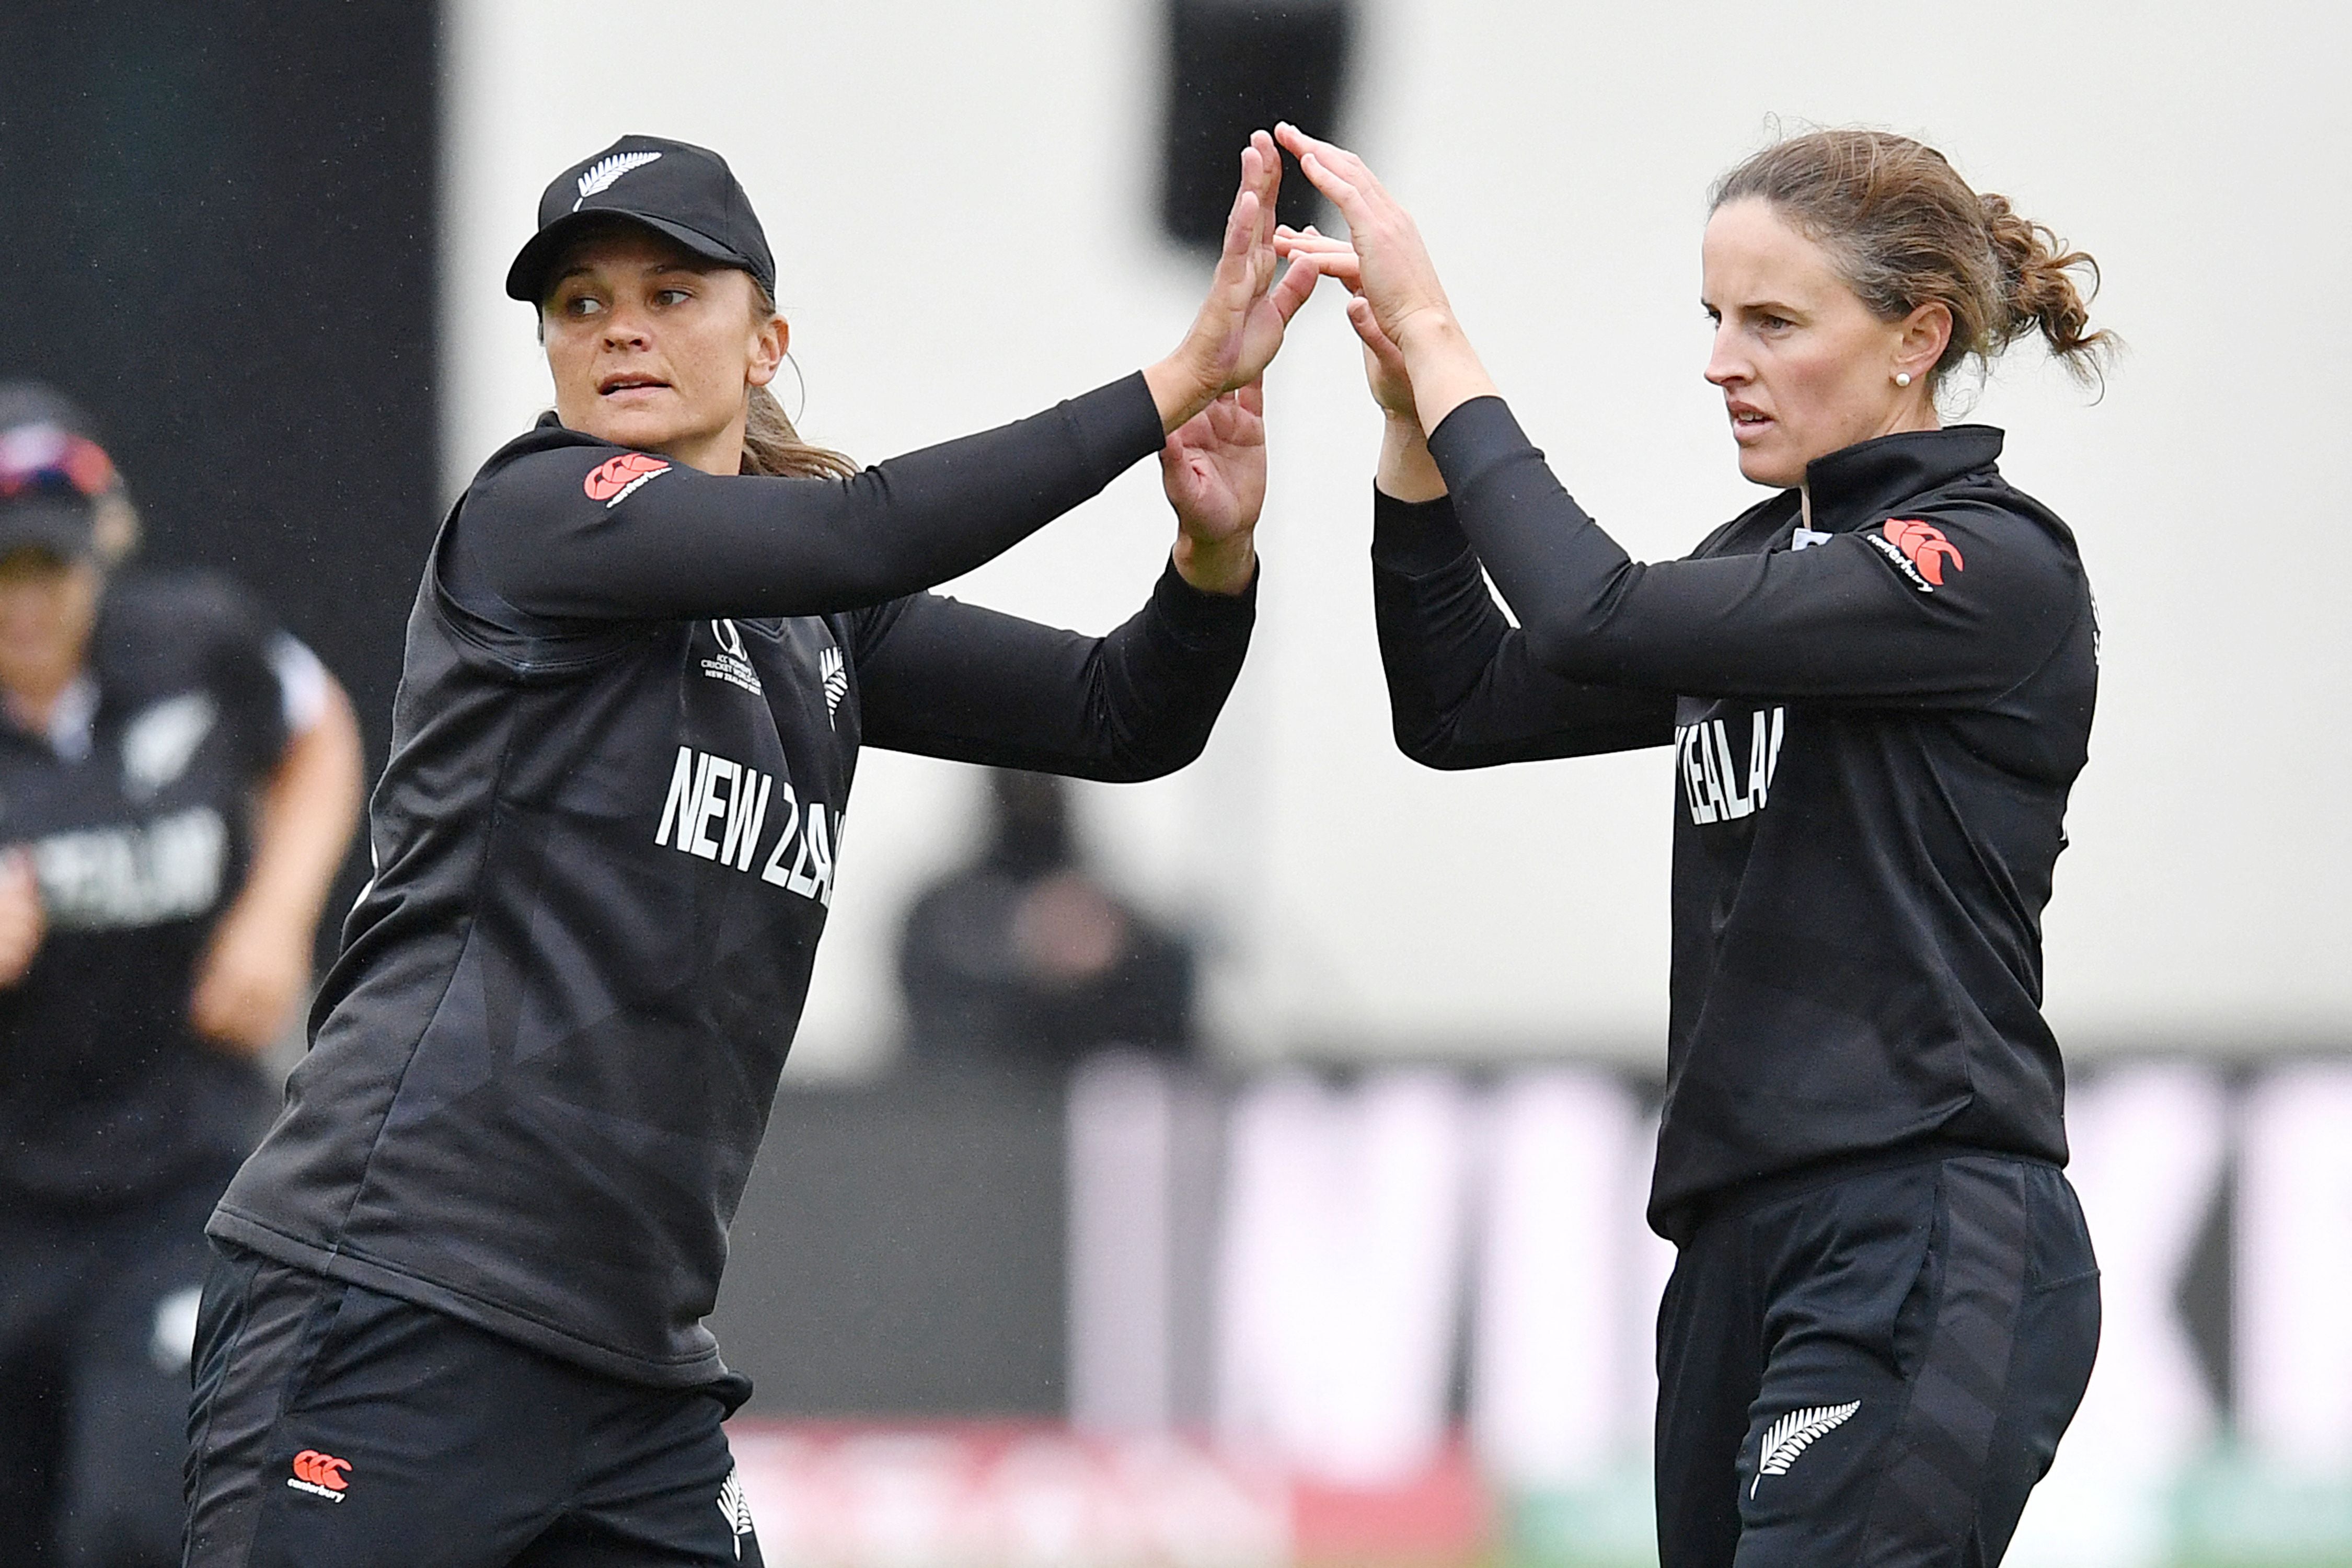 Suzie Bates, left, is the face of the tournament in New Zealand